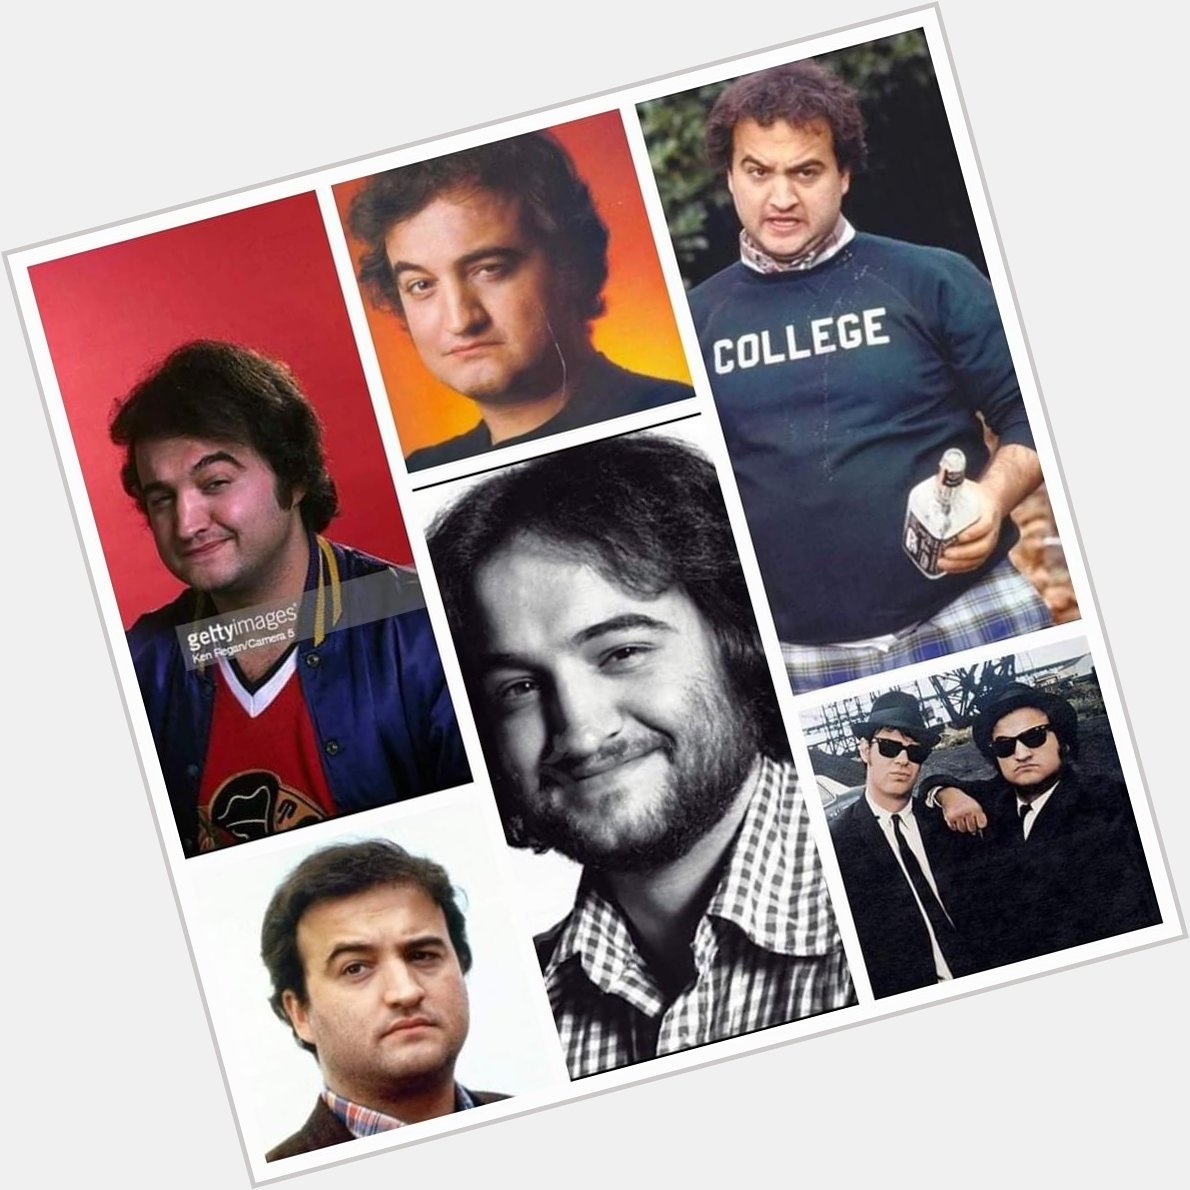 Happy Birthday to the late John Belushi
(January 24th 1949 - March 5th 1982) 